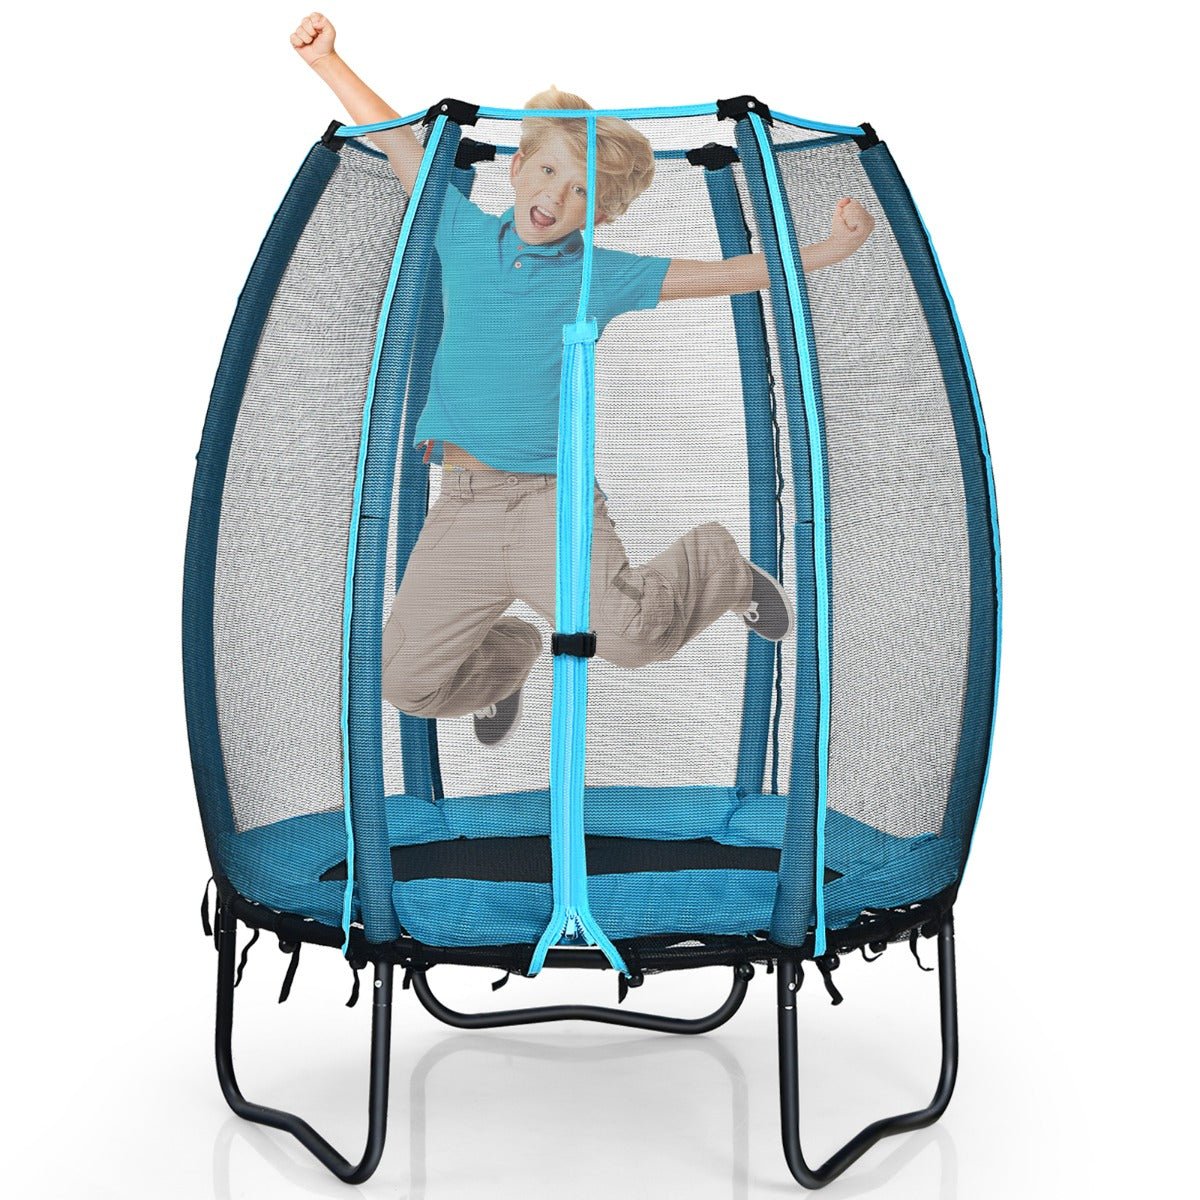 Healthy Playtime: 42 Inches Trampoline with Enclosure Net and Safety Pad